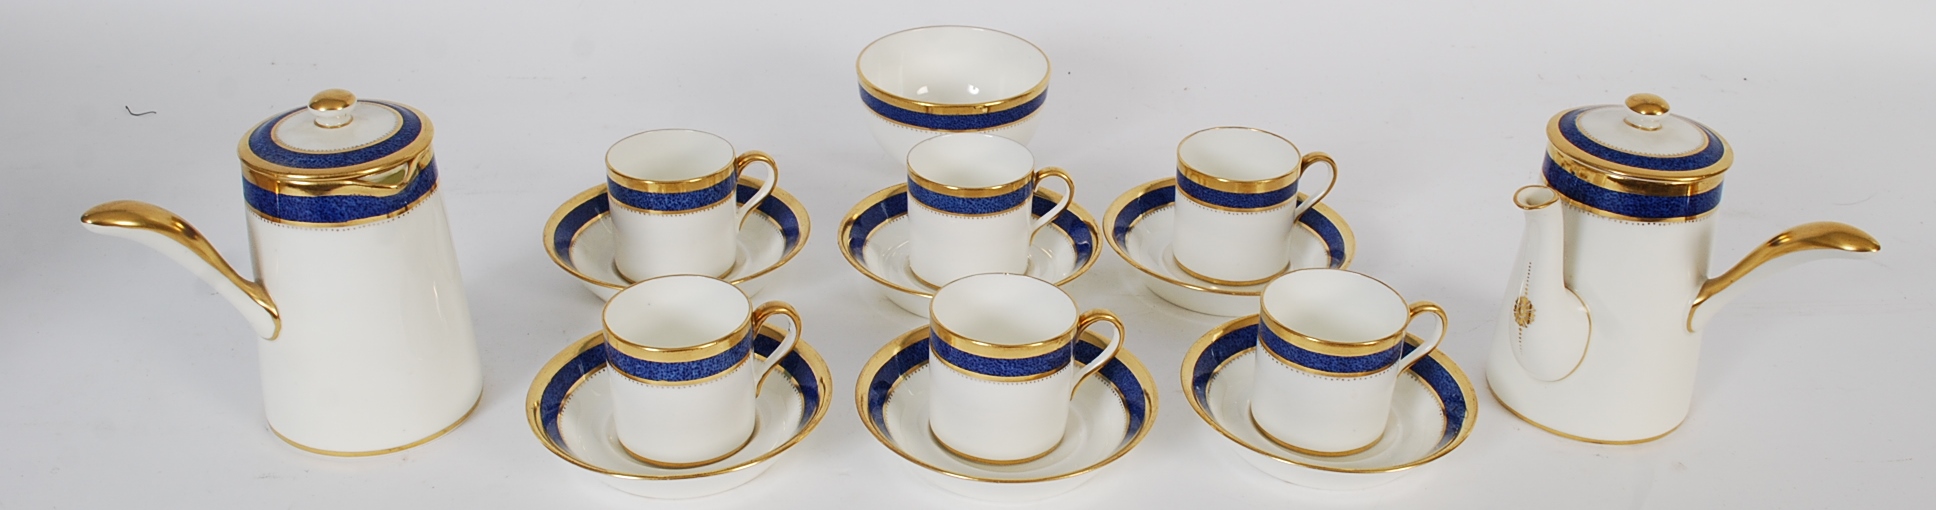 A Cauldron China tea / coffee set in deep royal blue rimmed colouring consisting of chocolate